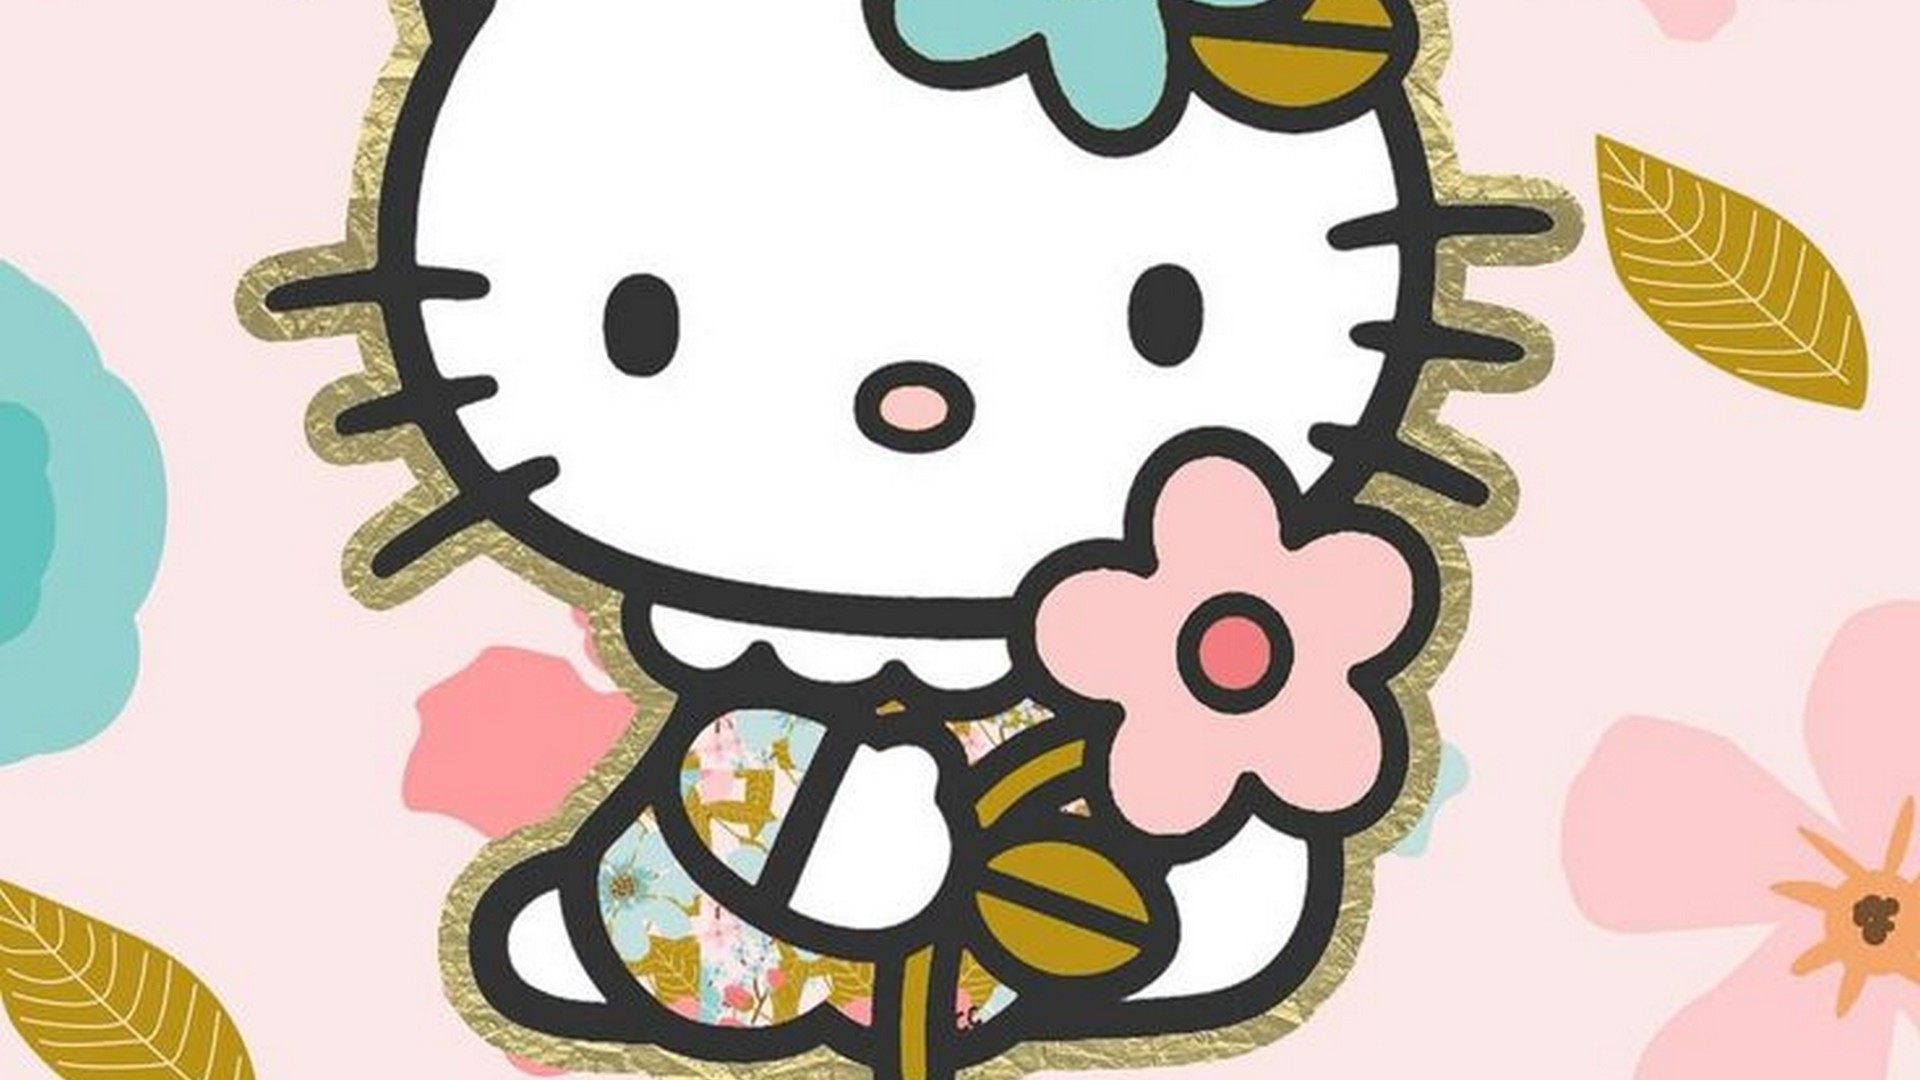 Hello Kitty Wallpaper HD With Resolution 1920X1080 pixel. You can make this wallpaper for your Desktop Computer Backgrounds, Mac Wallpapers, Android Lock screen or iPhone Screensavers